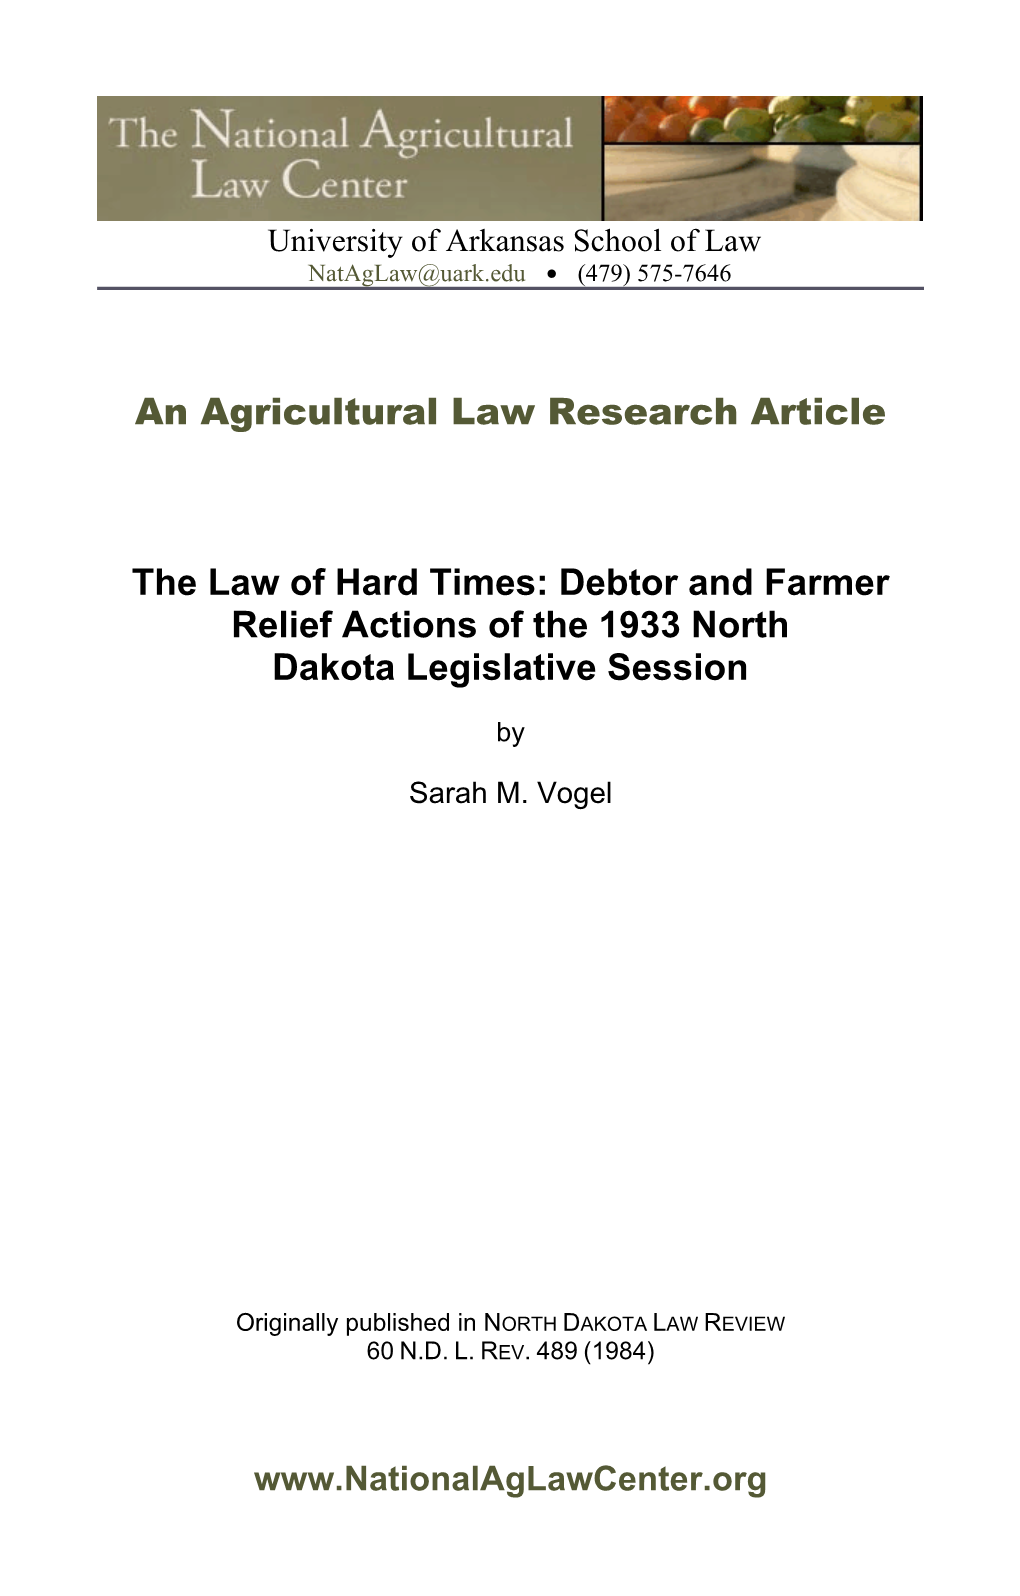 An Agricultural Law Research Article the Law of Hard Times: Debtor And